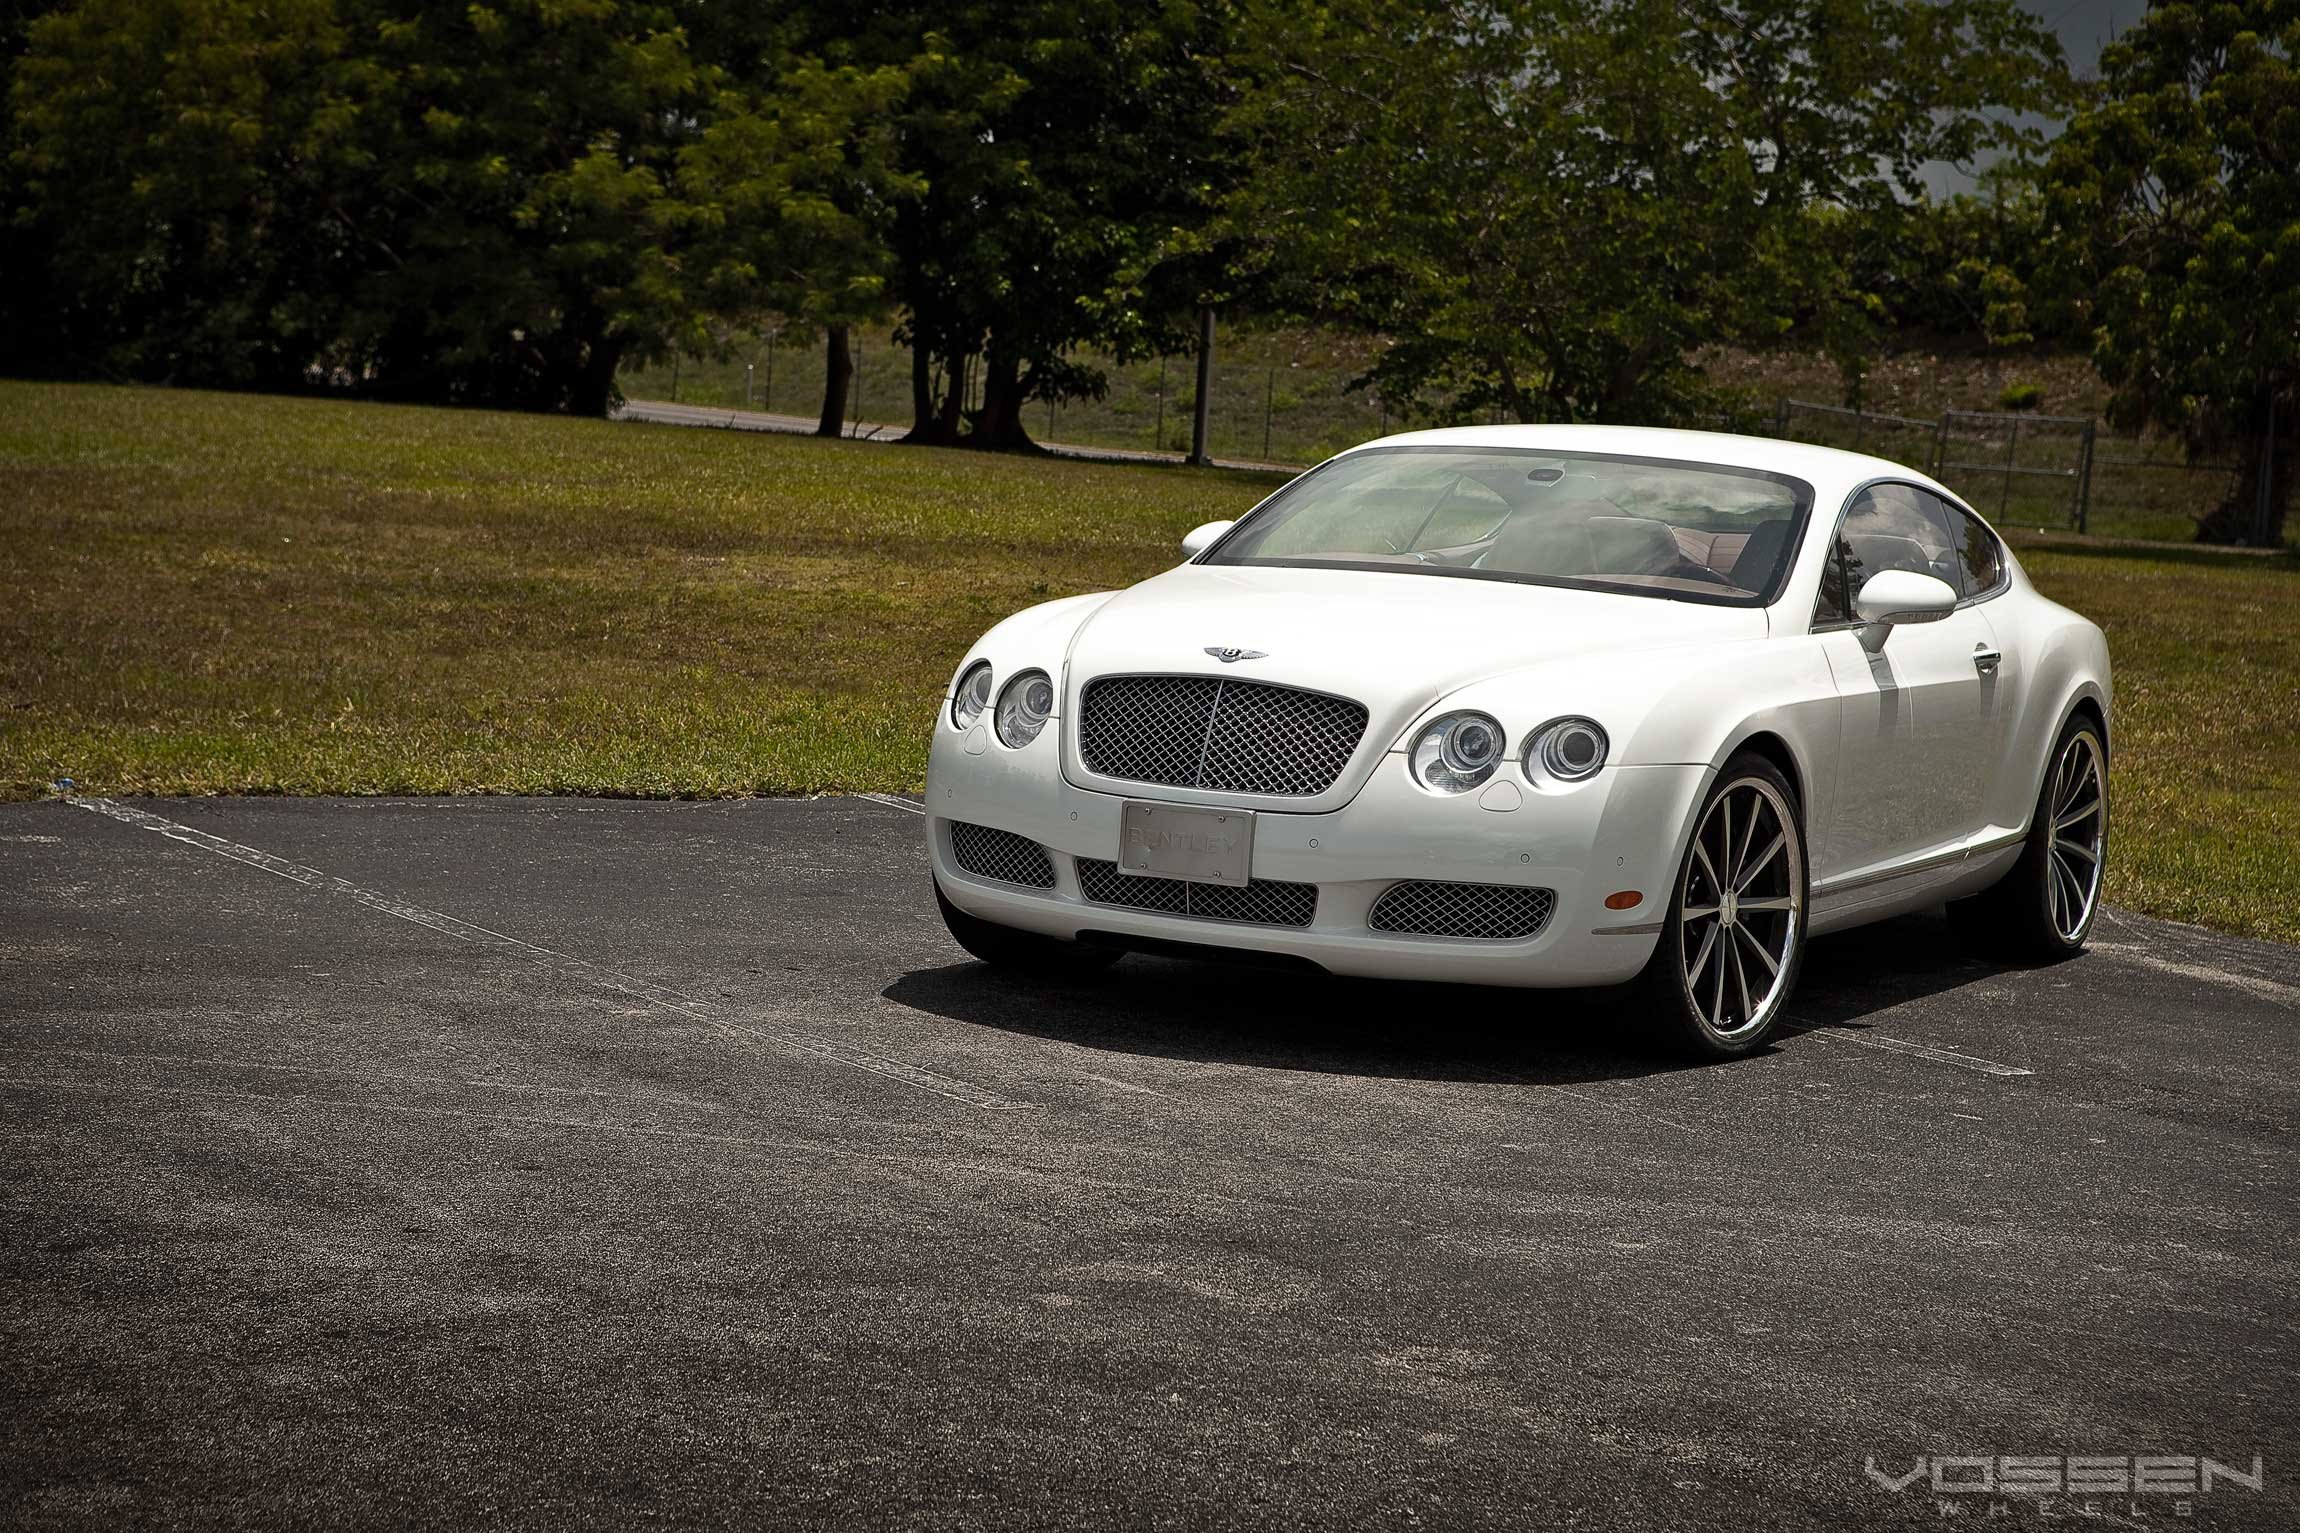 Crystal Clear Headlights on White Bentley Continental - Photo by Vossen